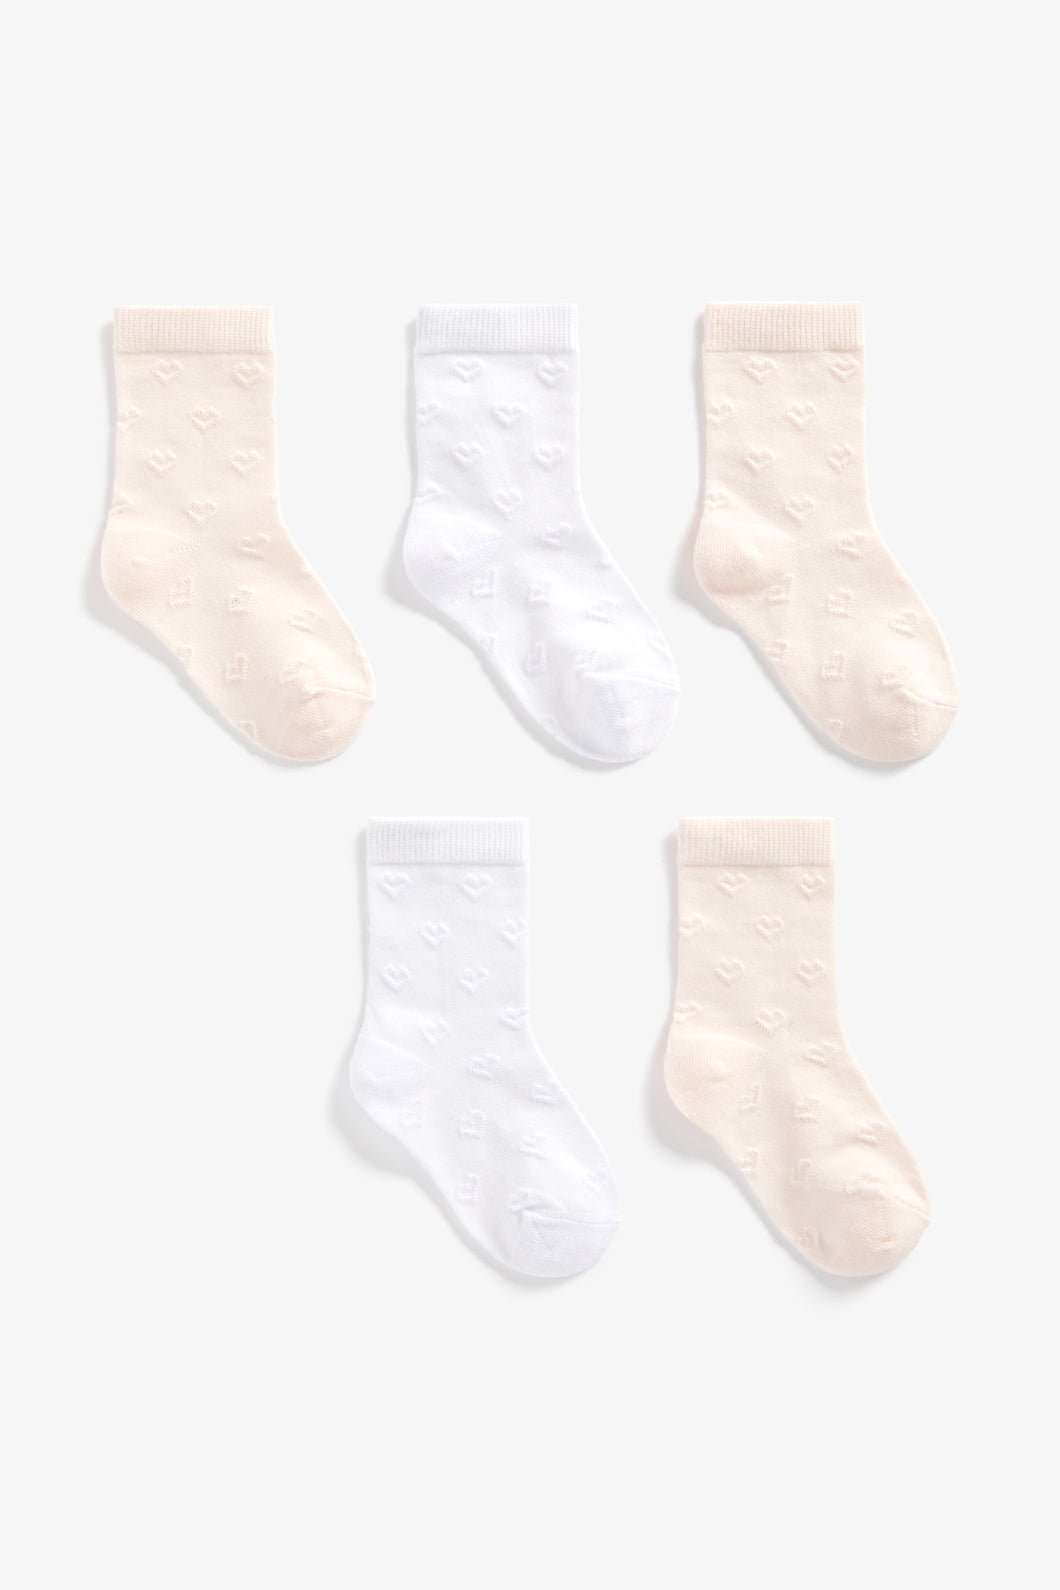 Mothercare Pink and White Socks with Aegis - 5 Pack